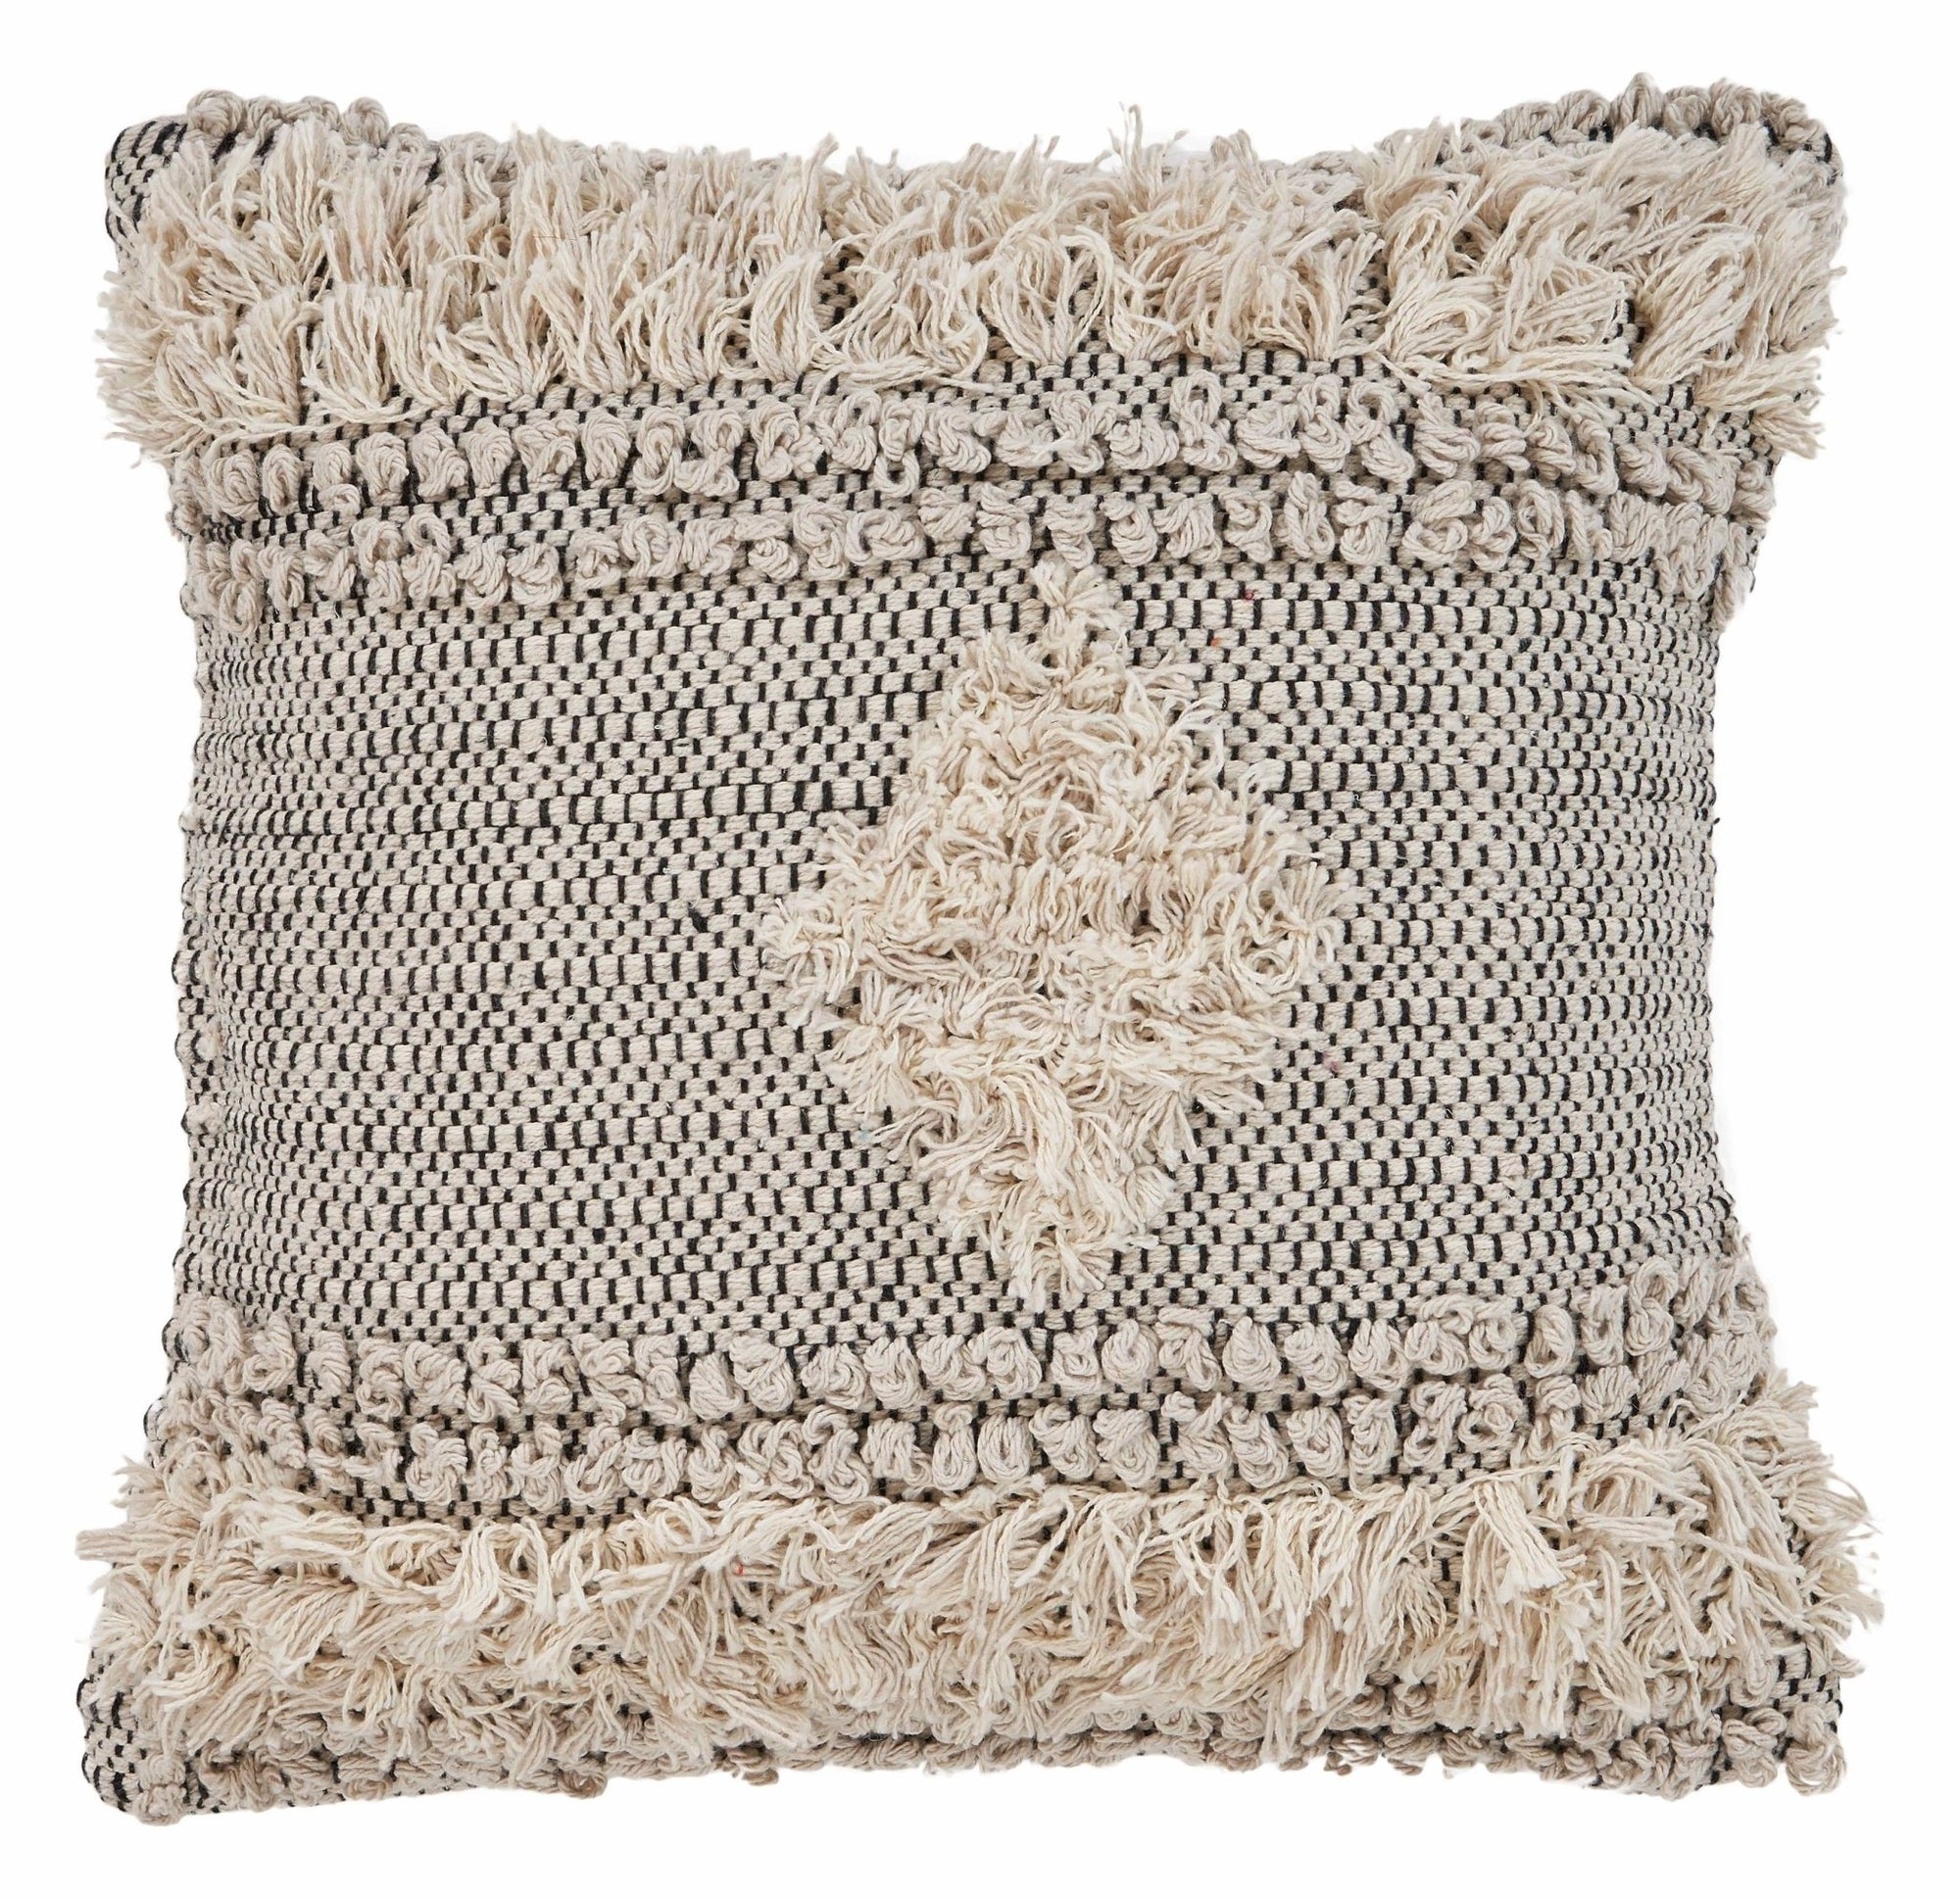 Hygge Cottage LR07320 Throw Pillow - Rug & Home